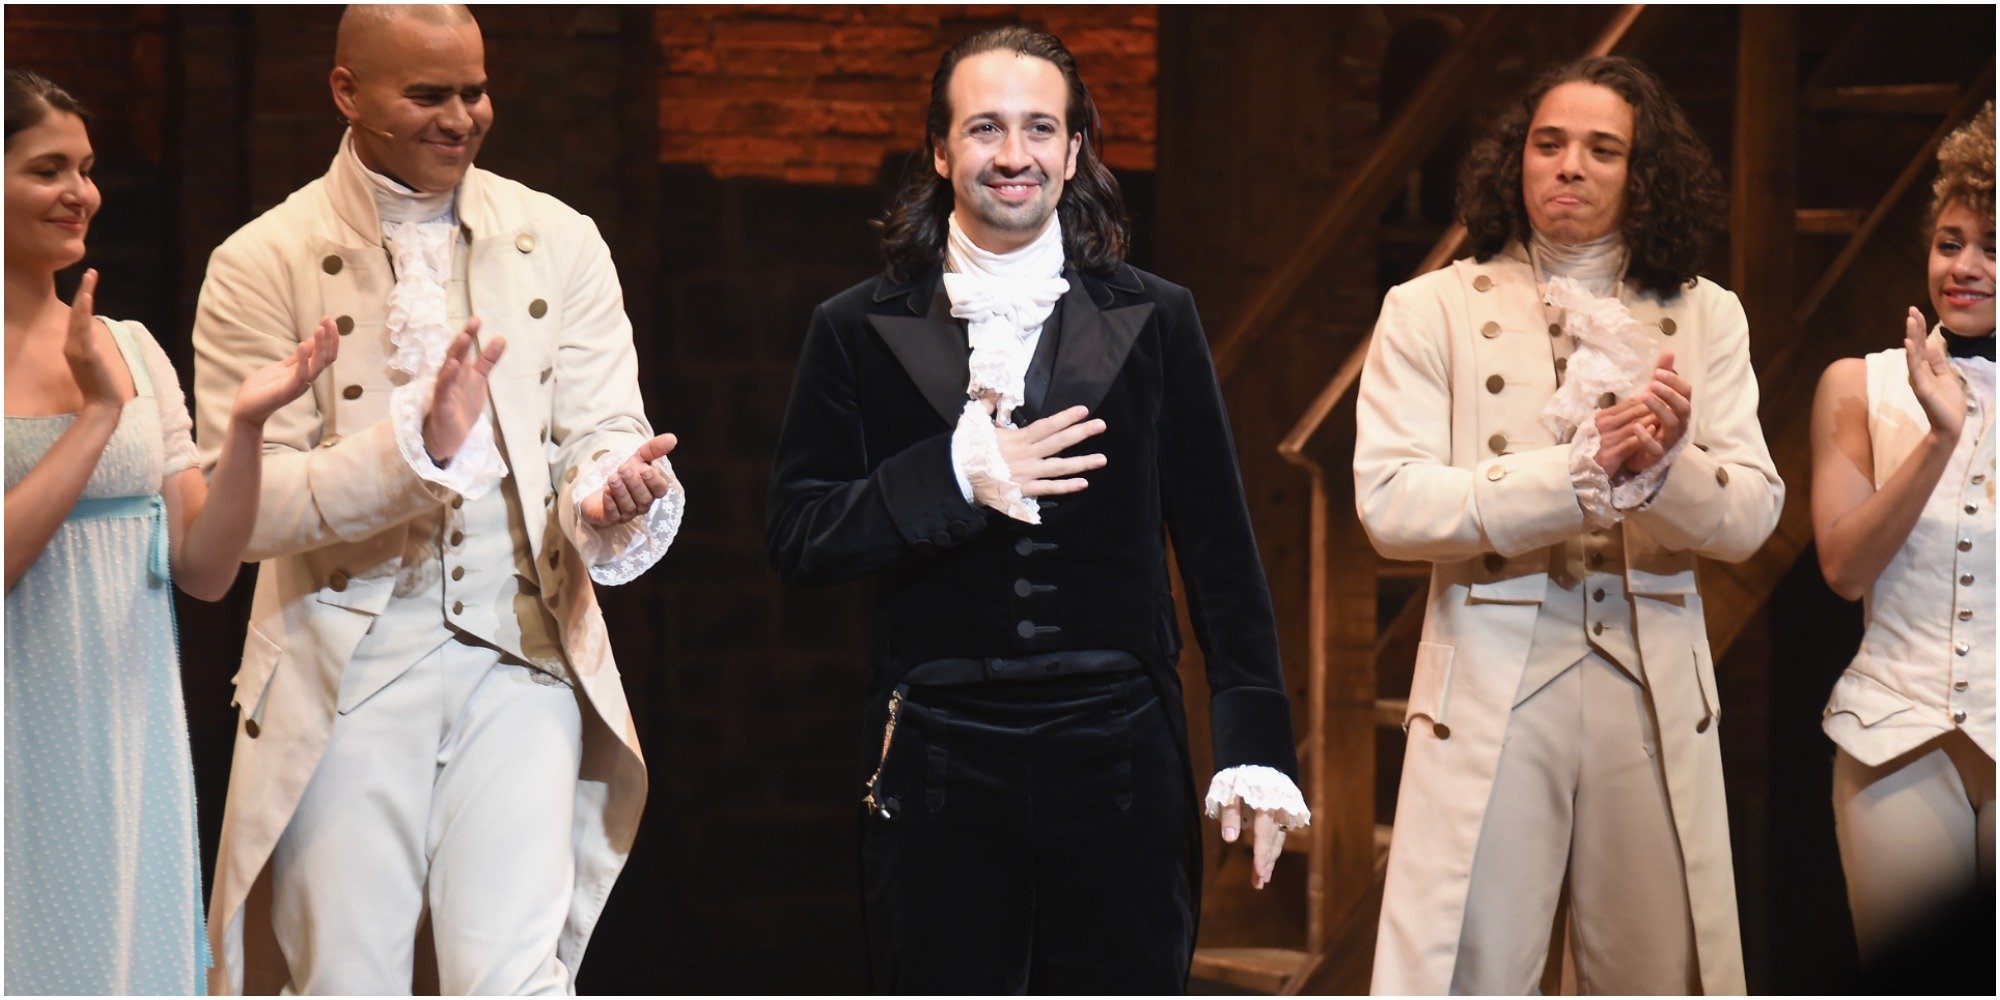 Broadway's Hamilton is not the most awarded musical theater show in history. That honor goes to a different production.